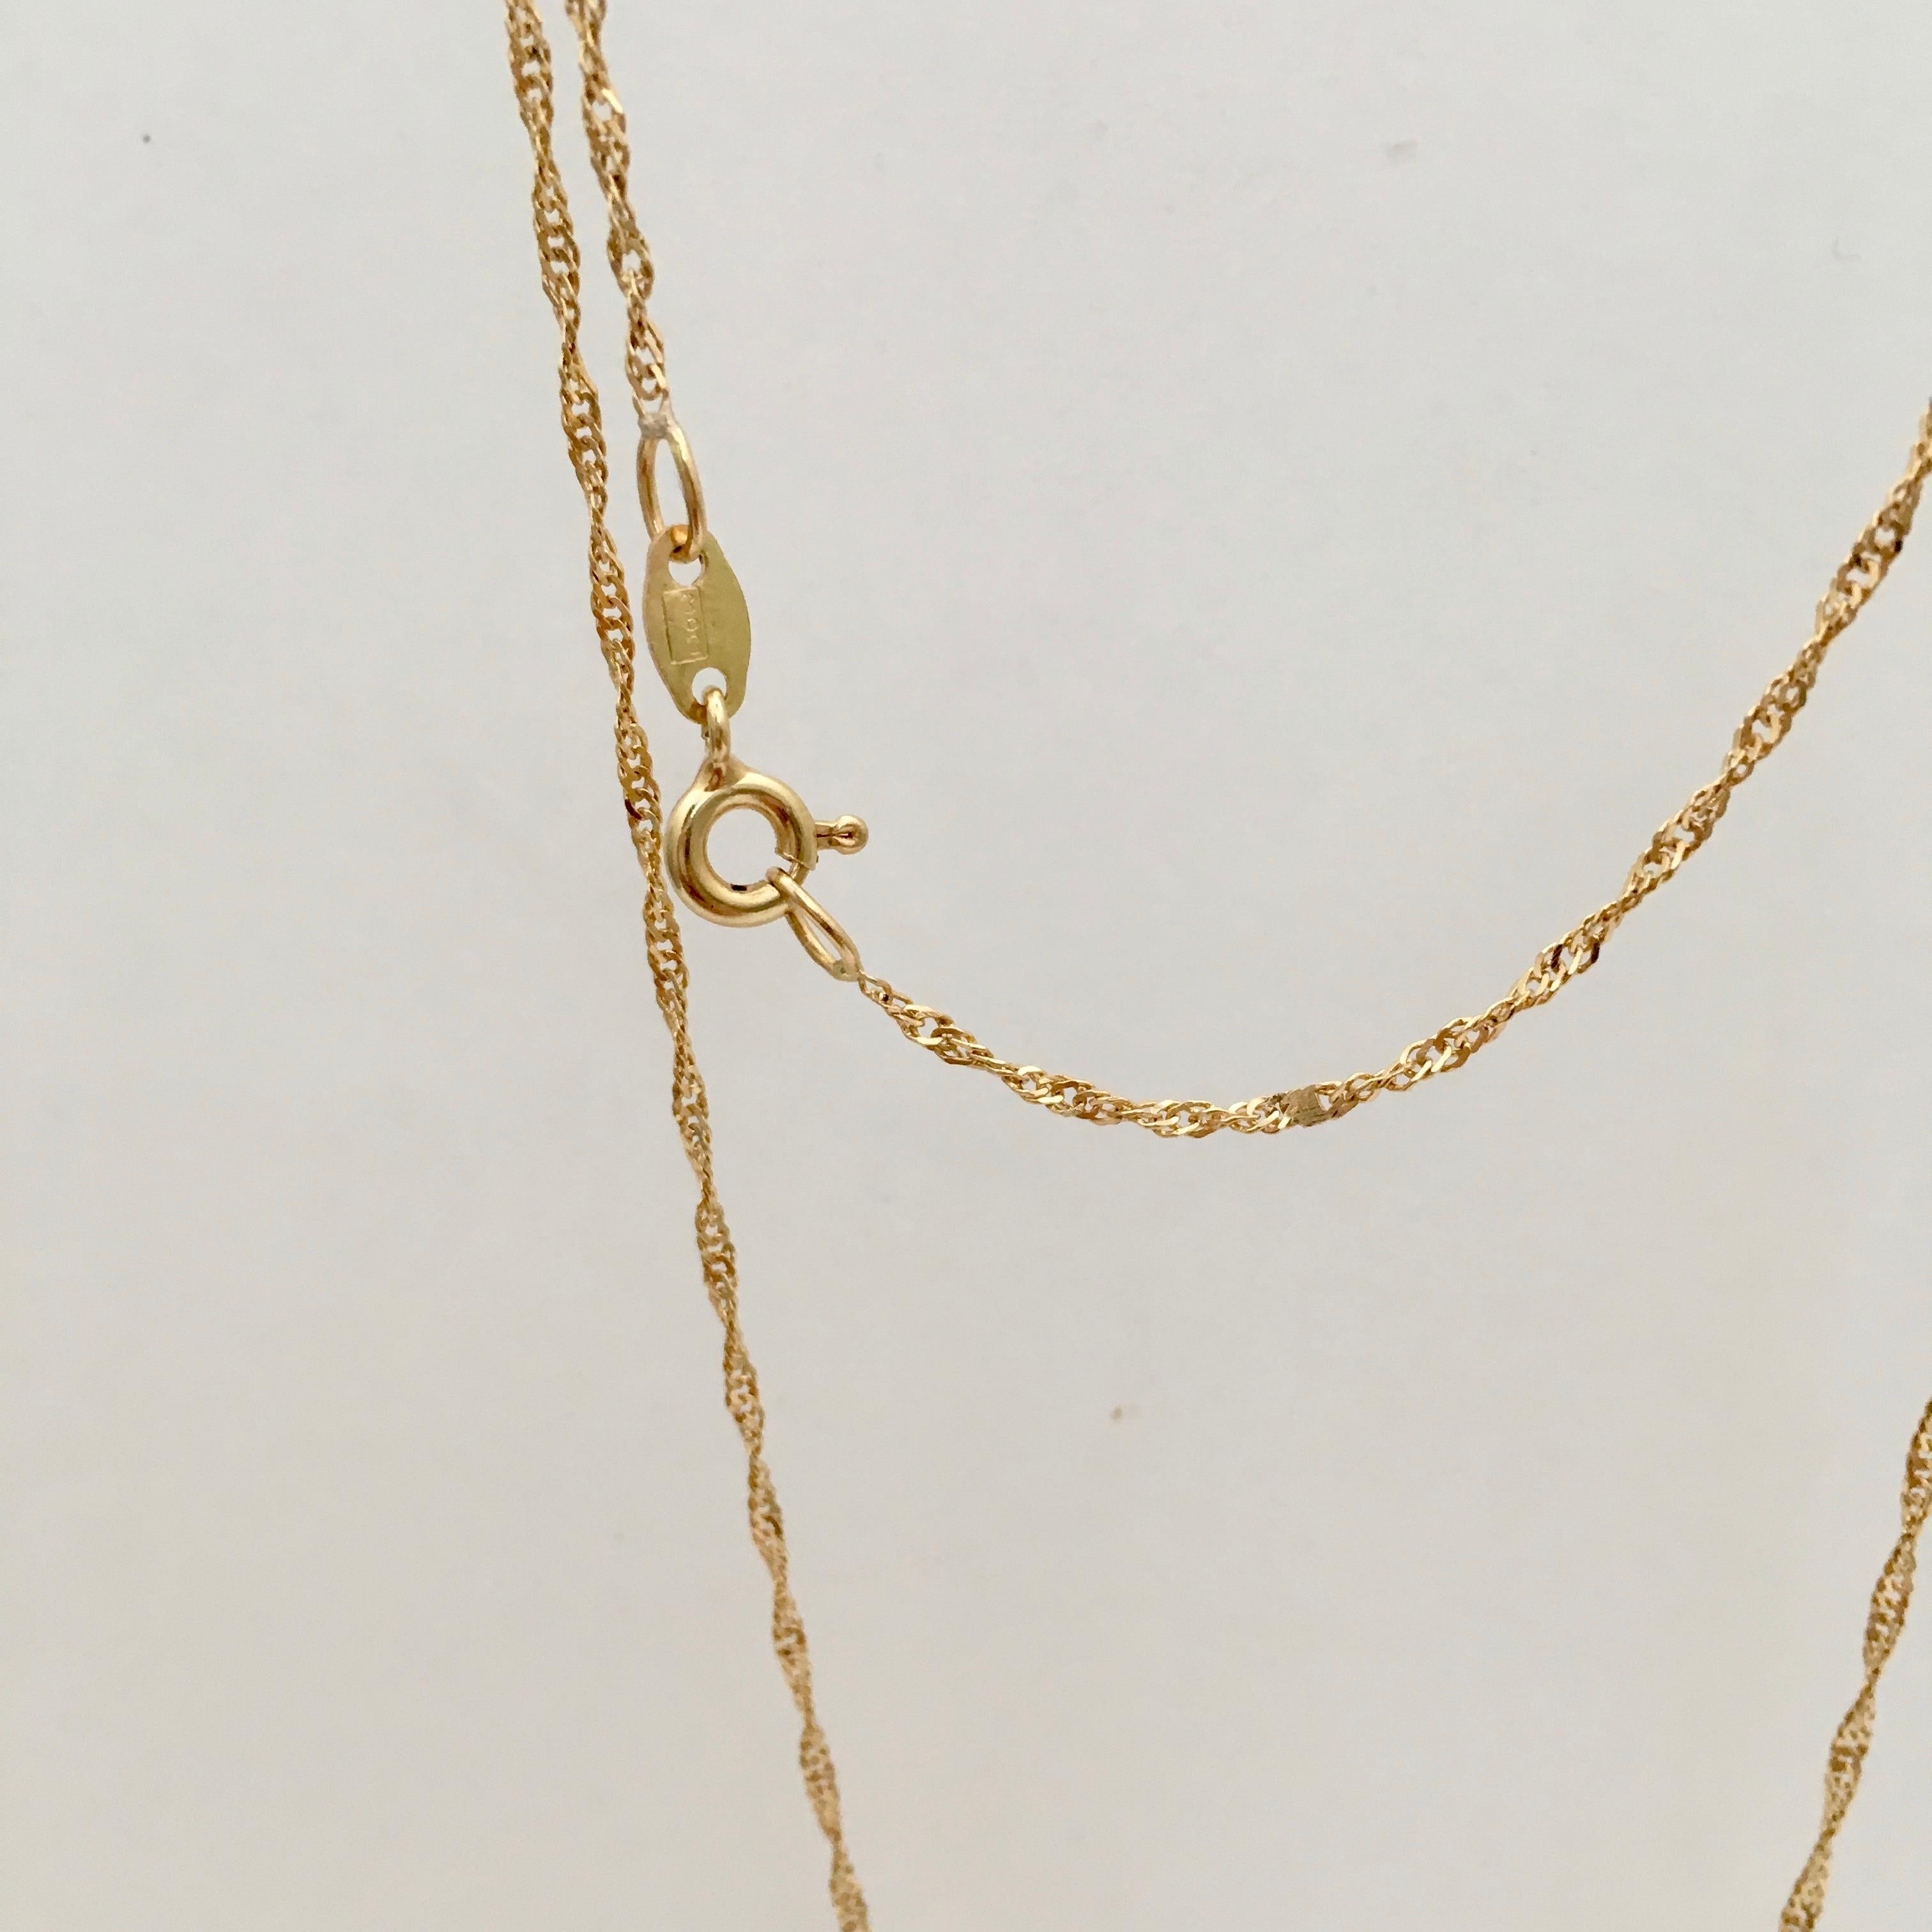 You can't go wrong with a lovely gold chain and this one is no exception. The bright high carat gold and twisted design catches the eye, and at 16 inches with an 8 inch drop it sits neatly on the collarbone. It is marked 750 on the clasp and link. A